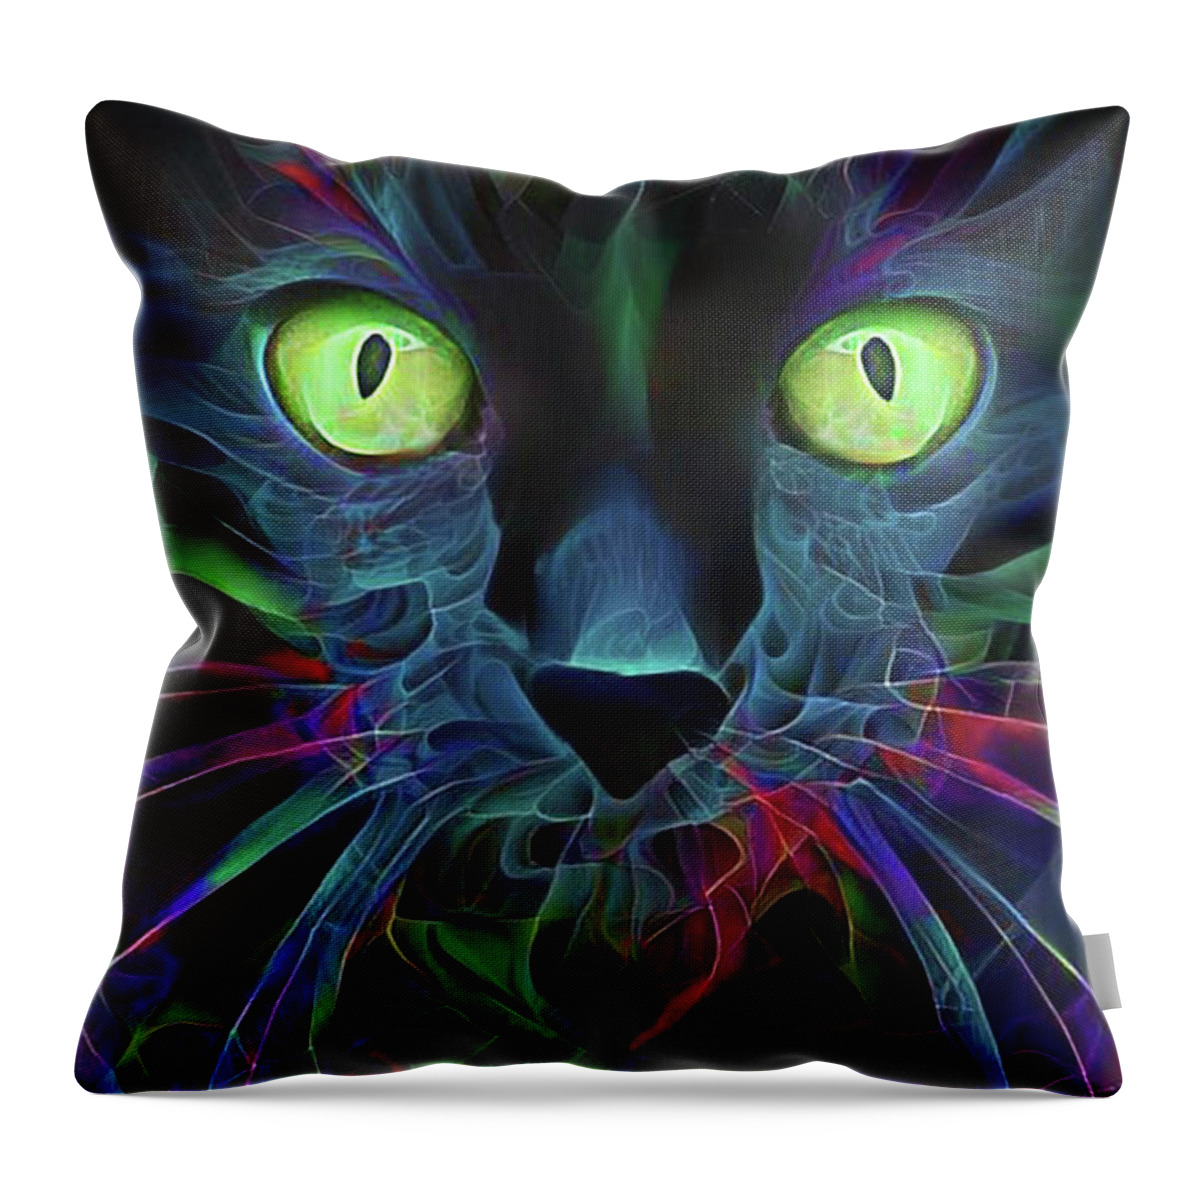 Black Cat Throw Pillow featuring the digital art Black Magic Cat by Peggy Collins